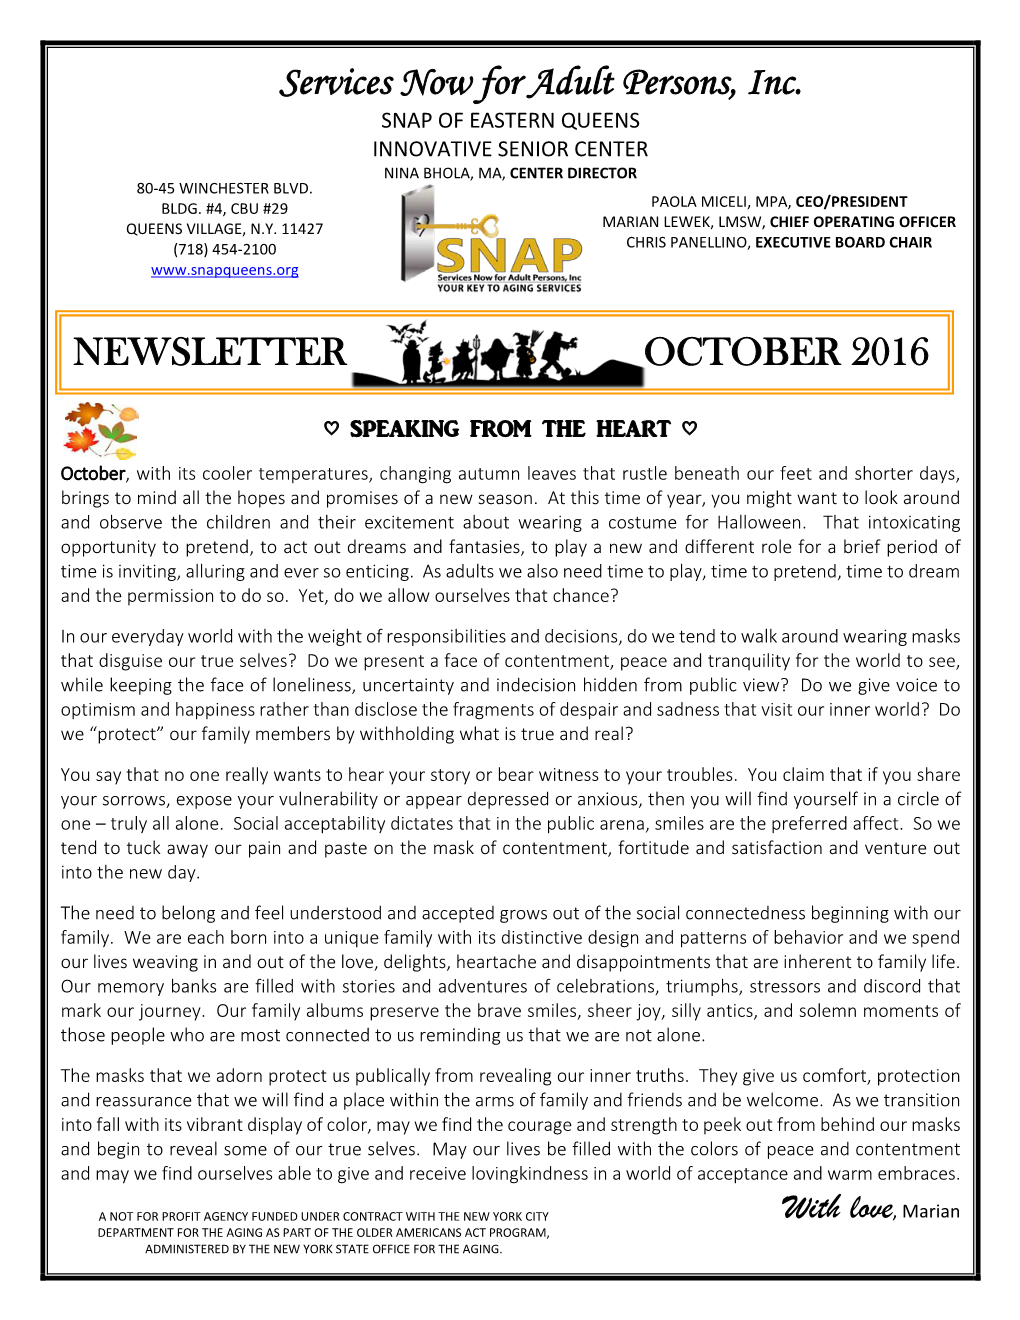 Services Now for Adult Persons, Inc. NEWSLETTER OCTOBER 2016